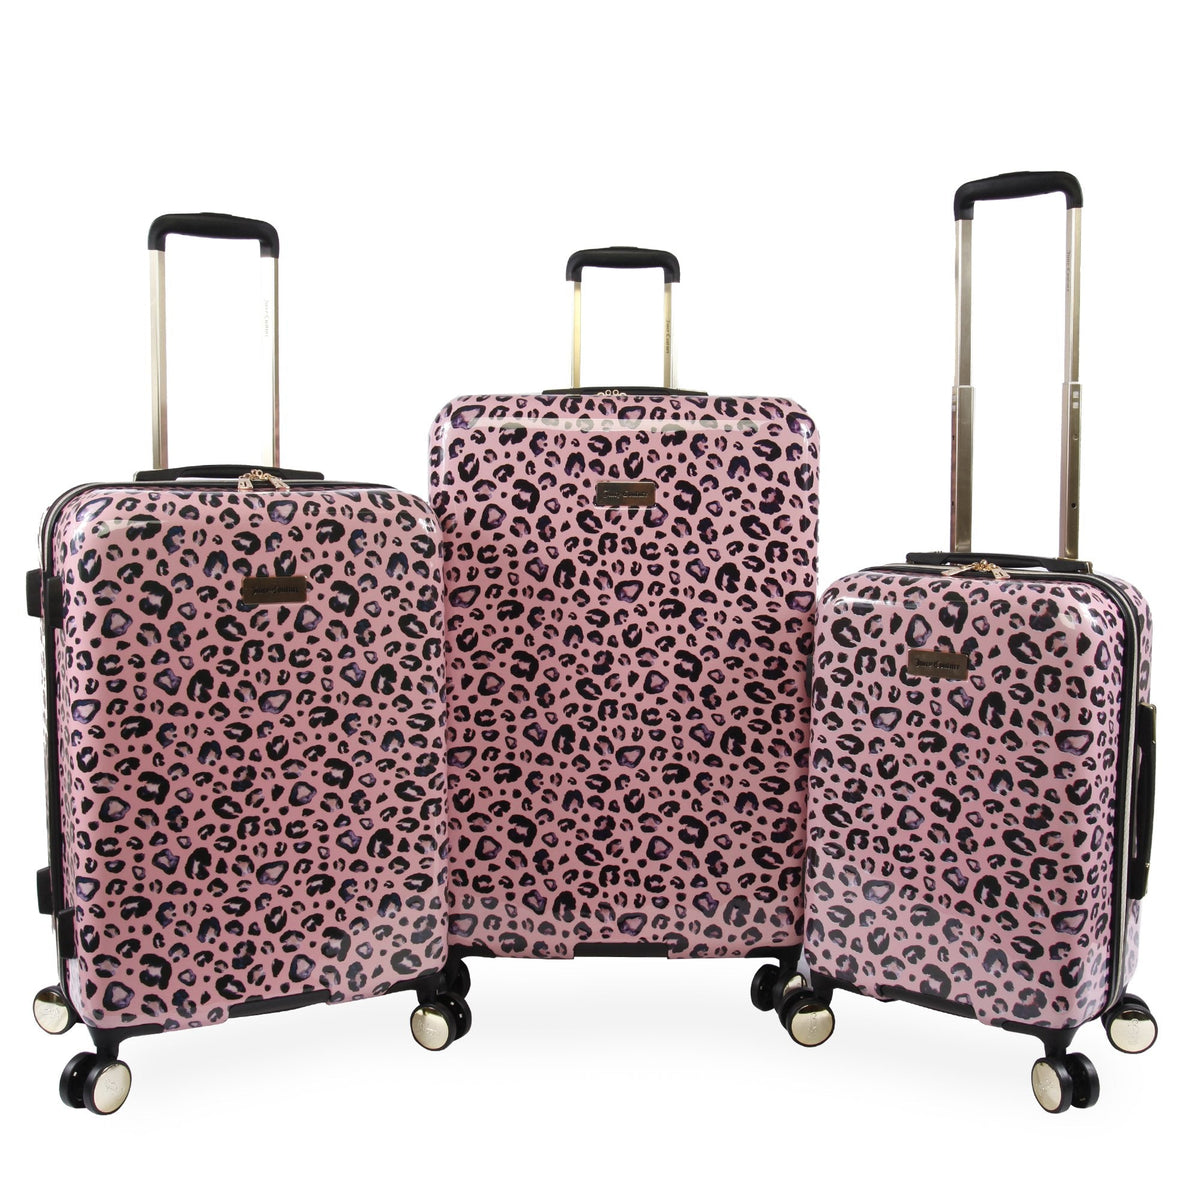 Juicy Couture 3-Piece Hardside Spinner Luggage Set Pink Leopard